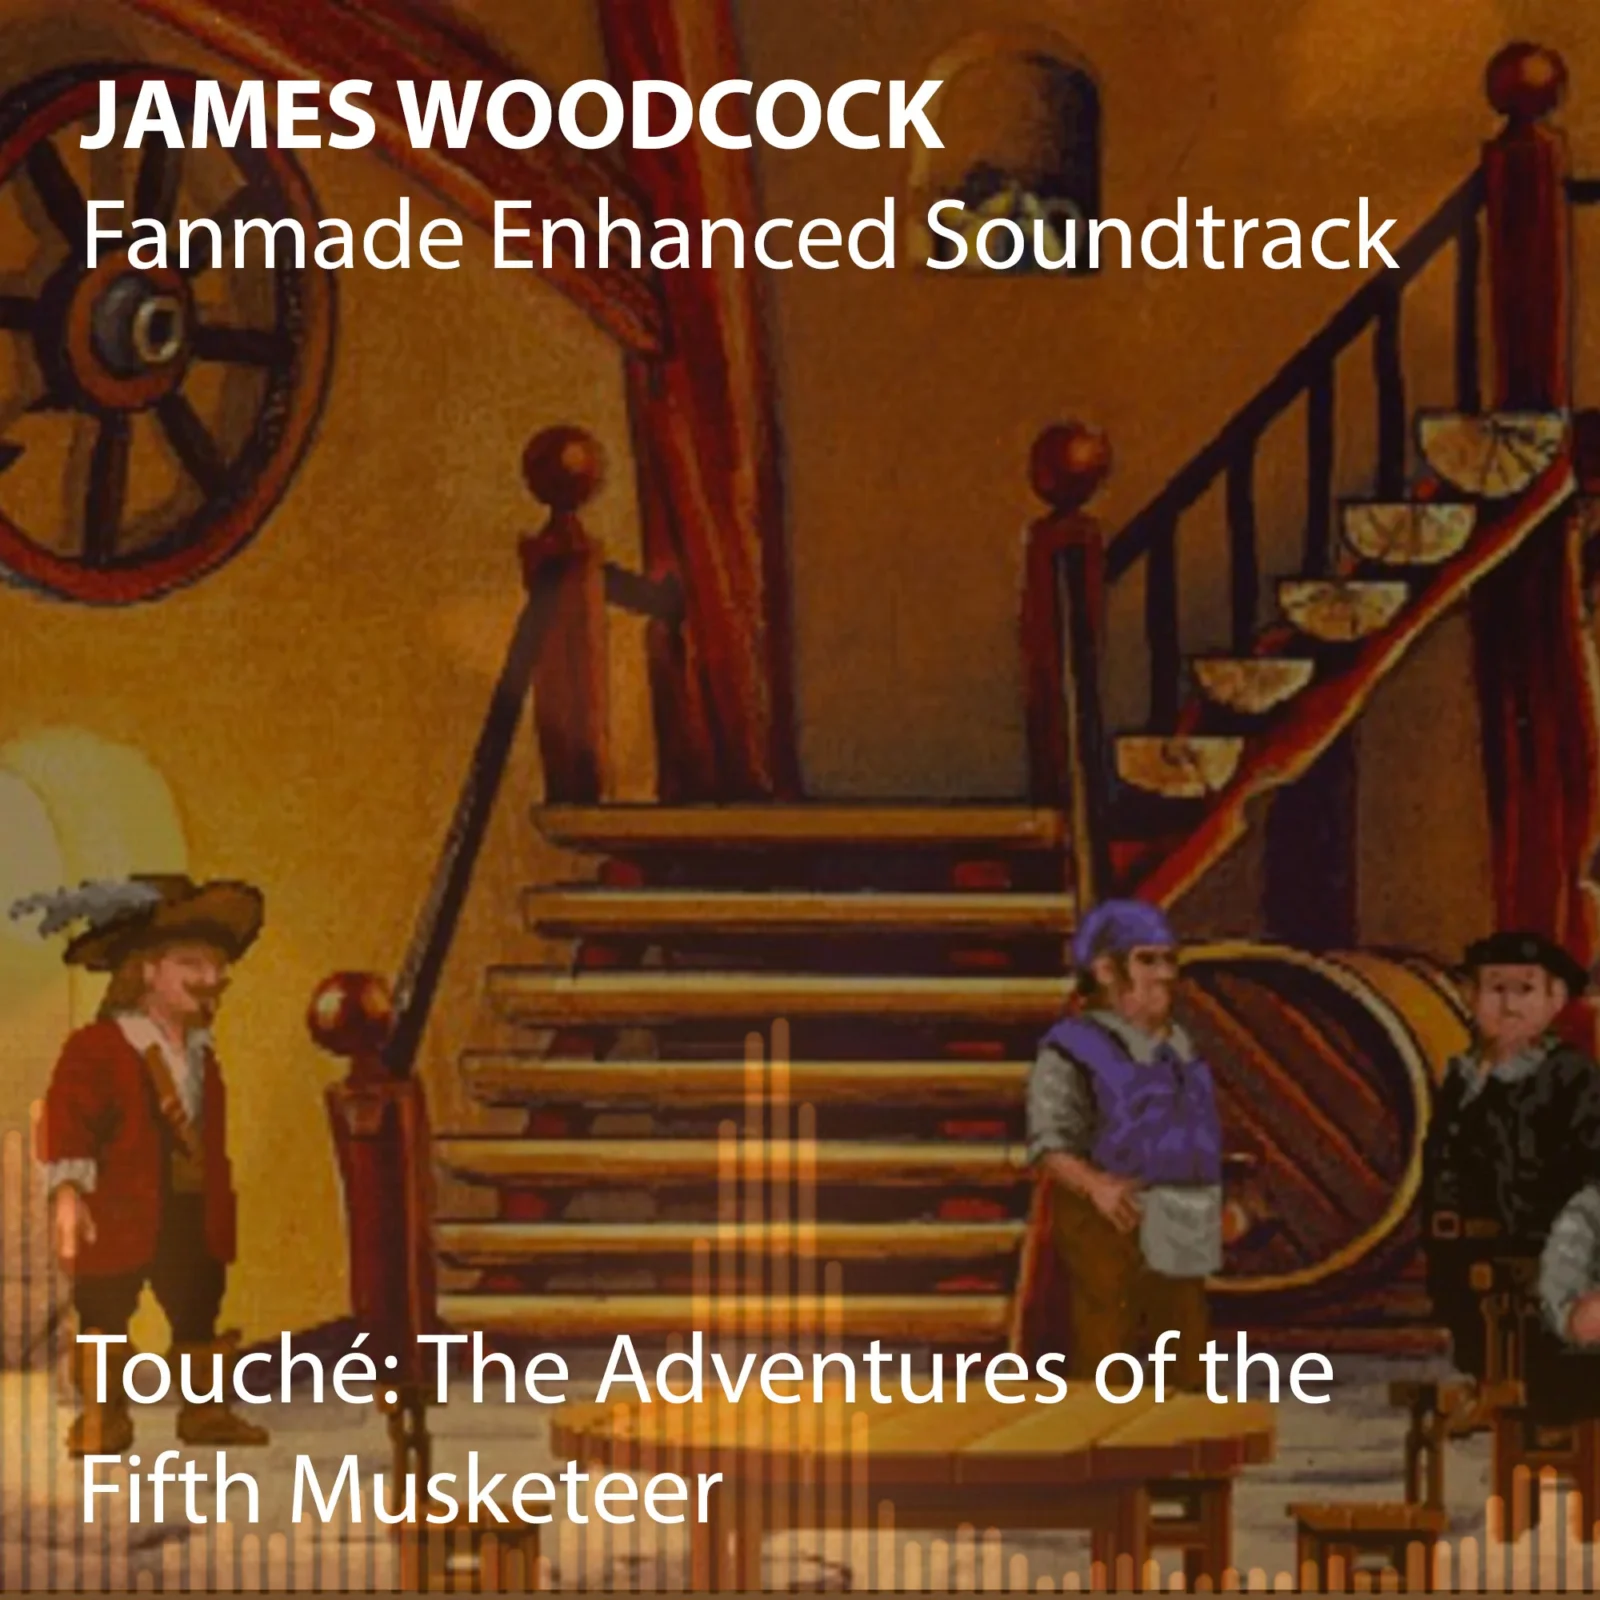 Touché: The Adventures of the Fifth Musketeer Soundtrack